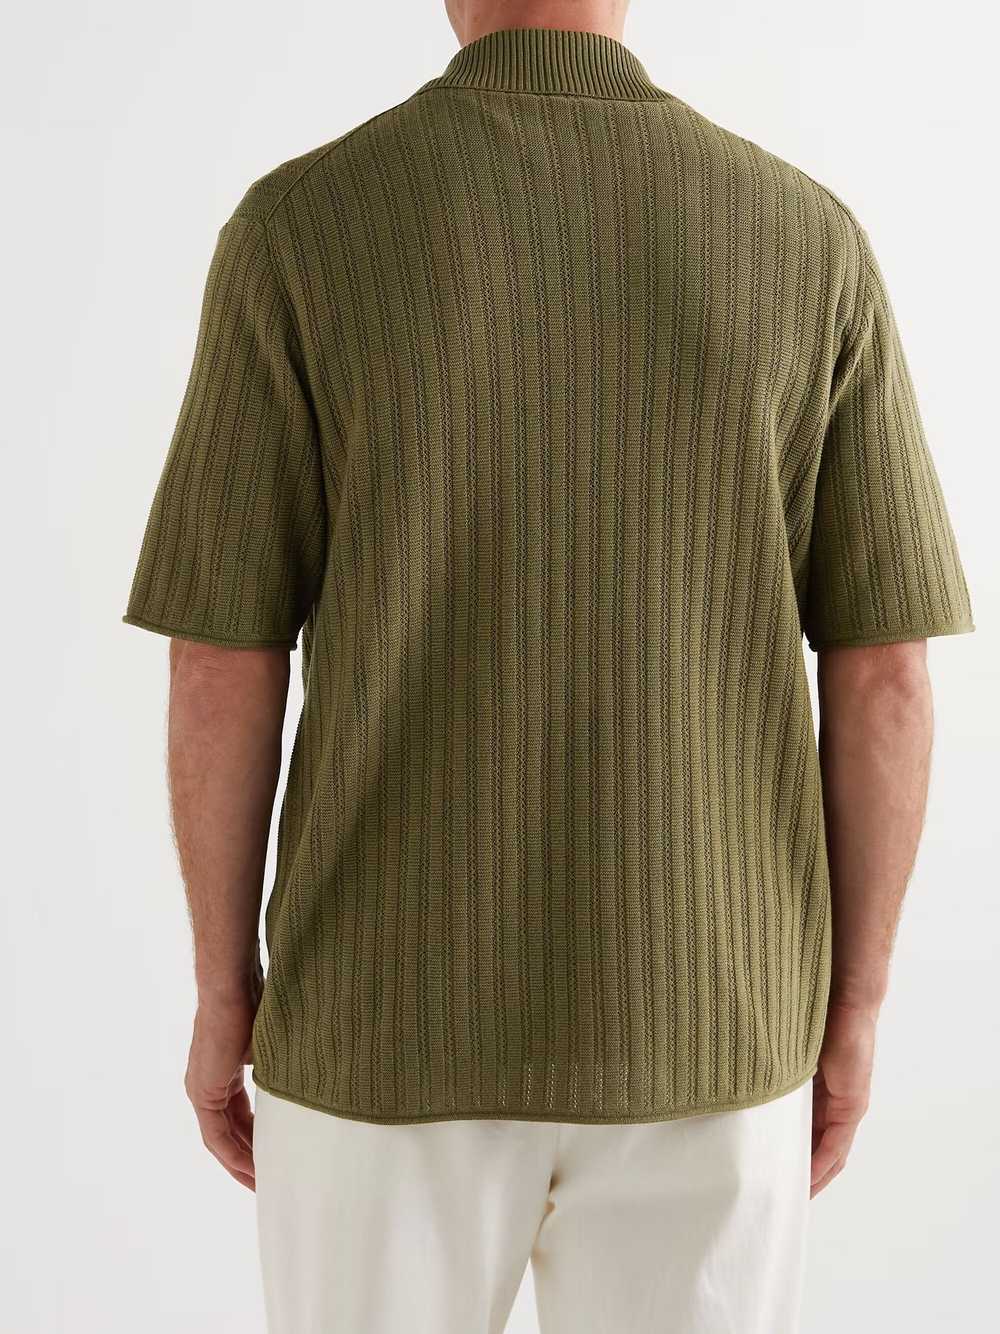 Mr. P. Open-Knit Cotton and Lyocell-Blend Shirt - image 4